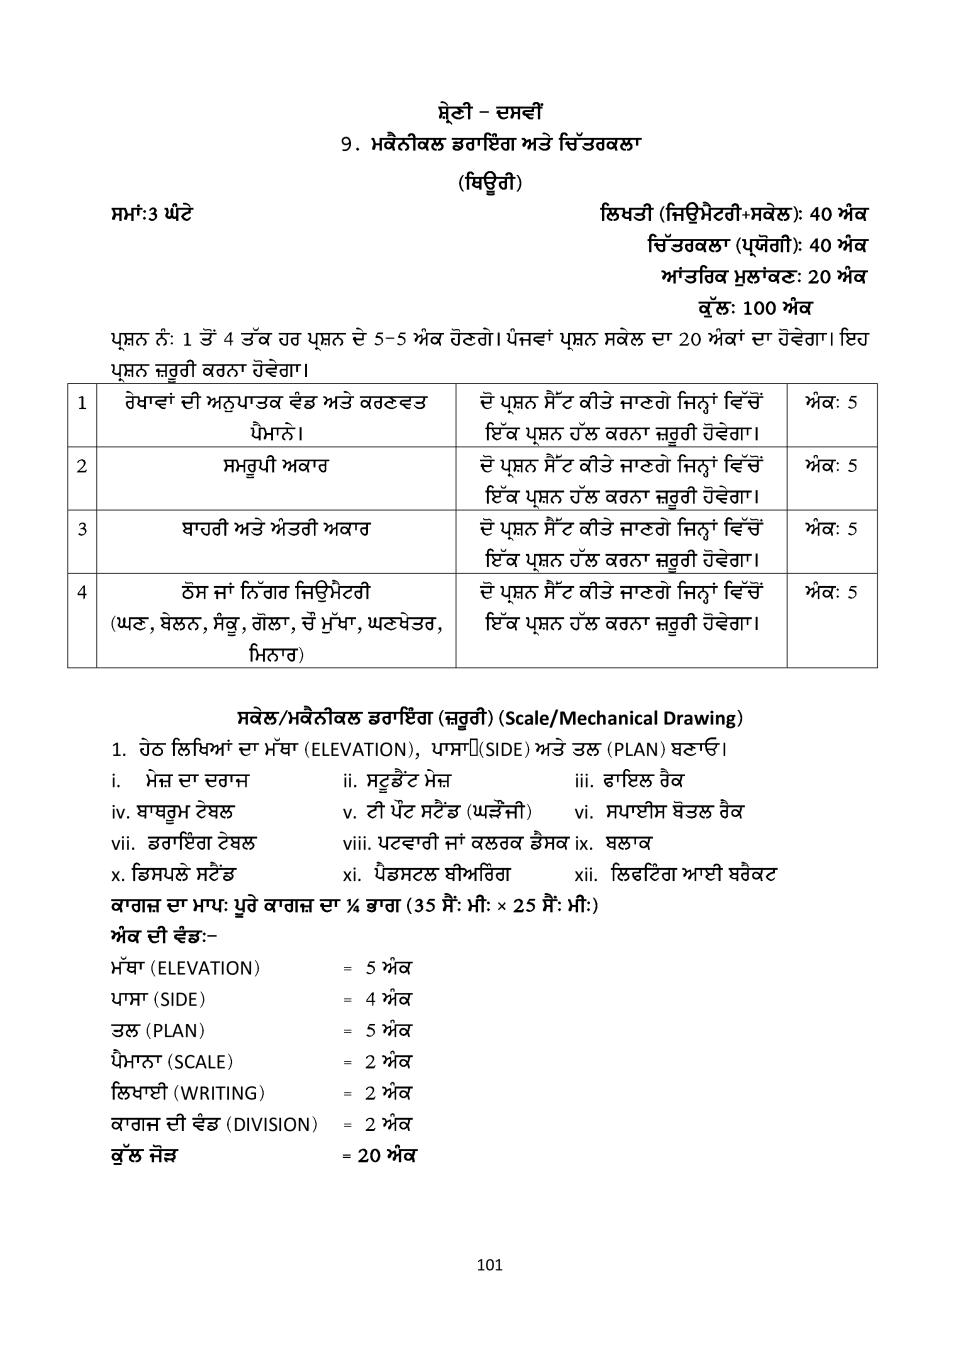 PSEB Syllabus 2020-21 for Class 10 Drawing - Page 1